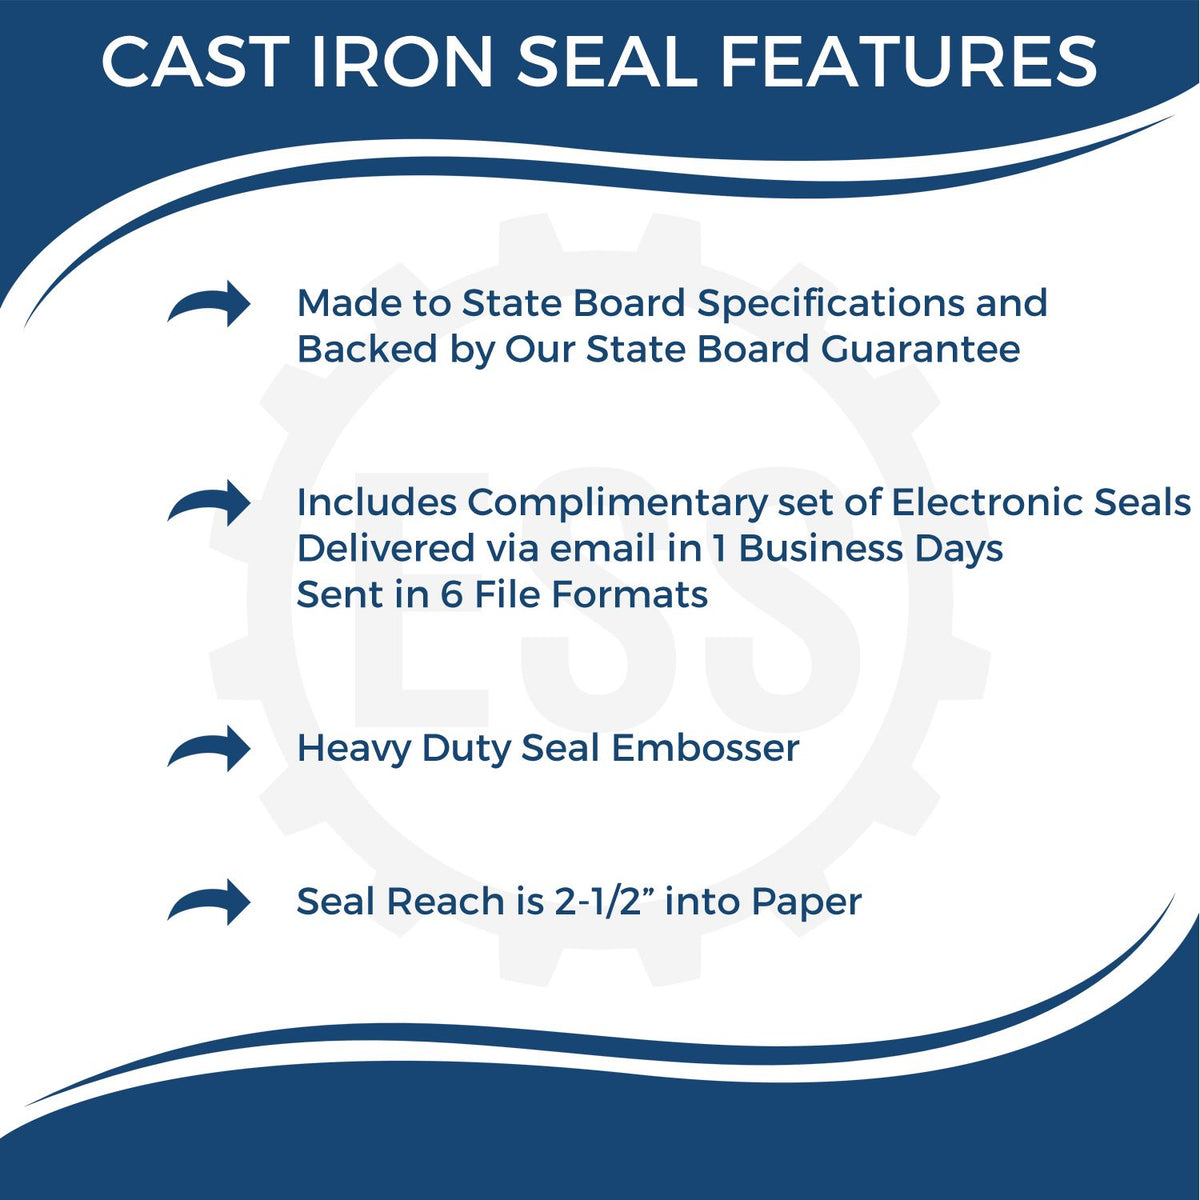 A picture of an infographic highlighting the selling points for the Heavy Duty Cast Iron Montana Land Surveyor Seal Embosser